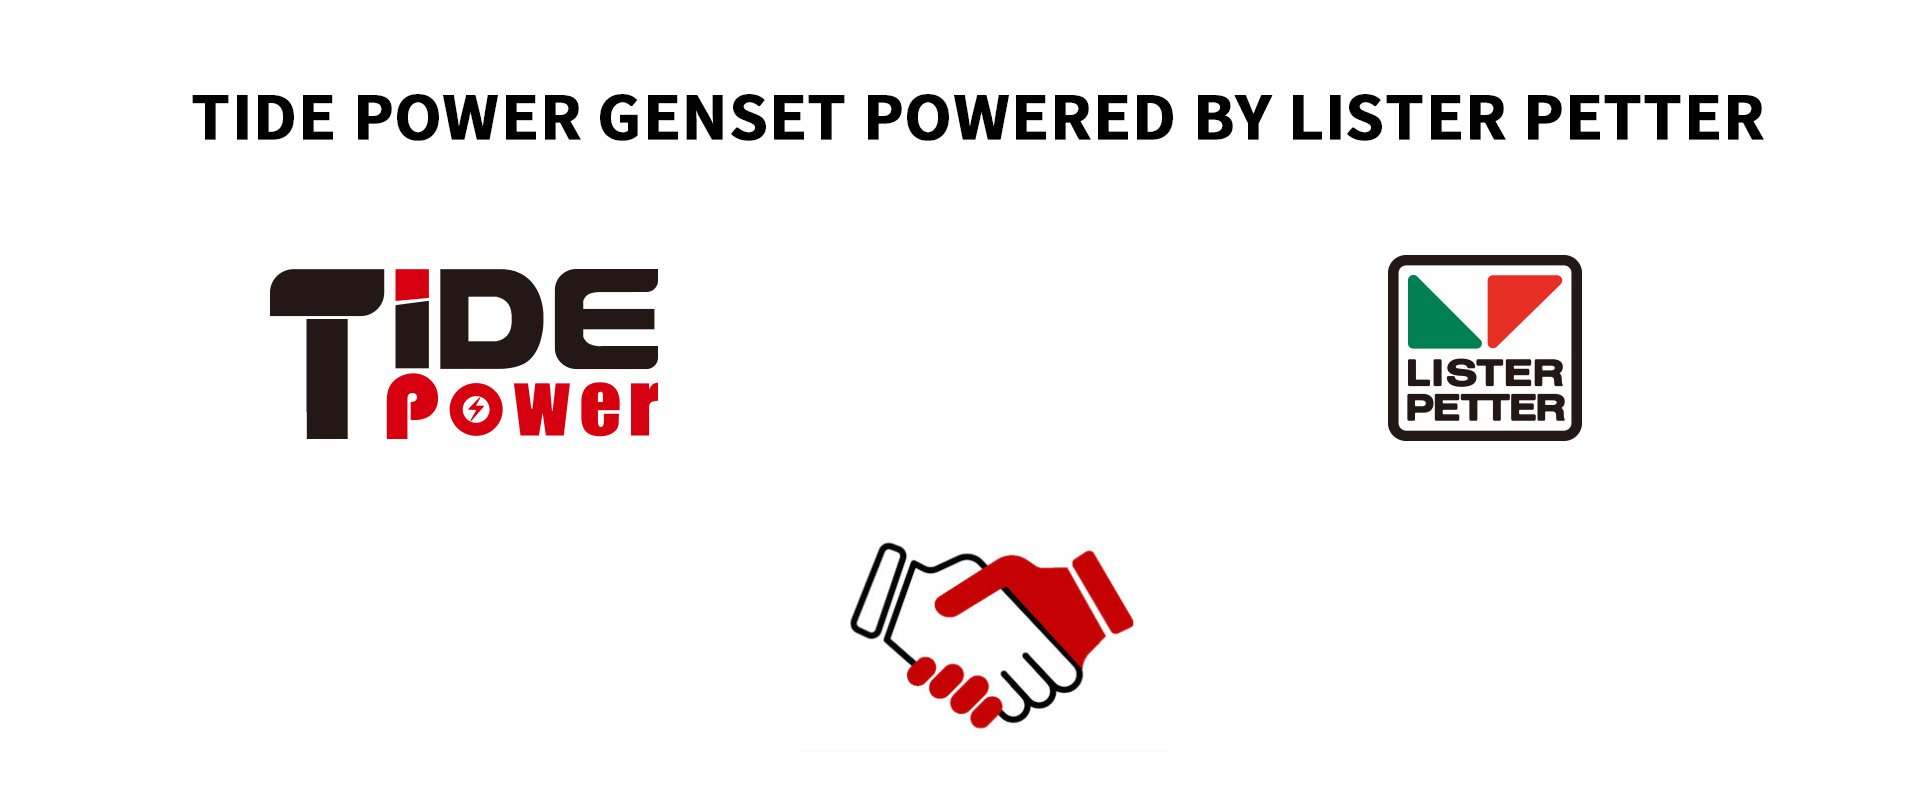 Tide power genset powered by lister petter